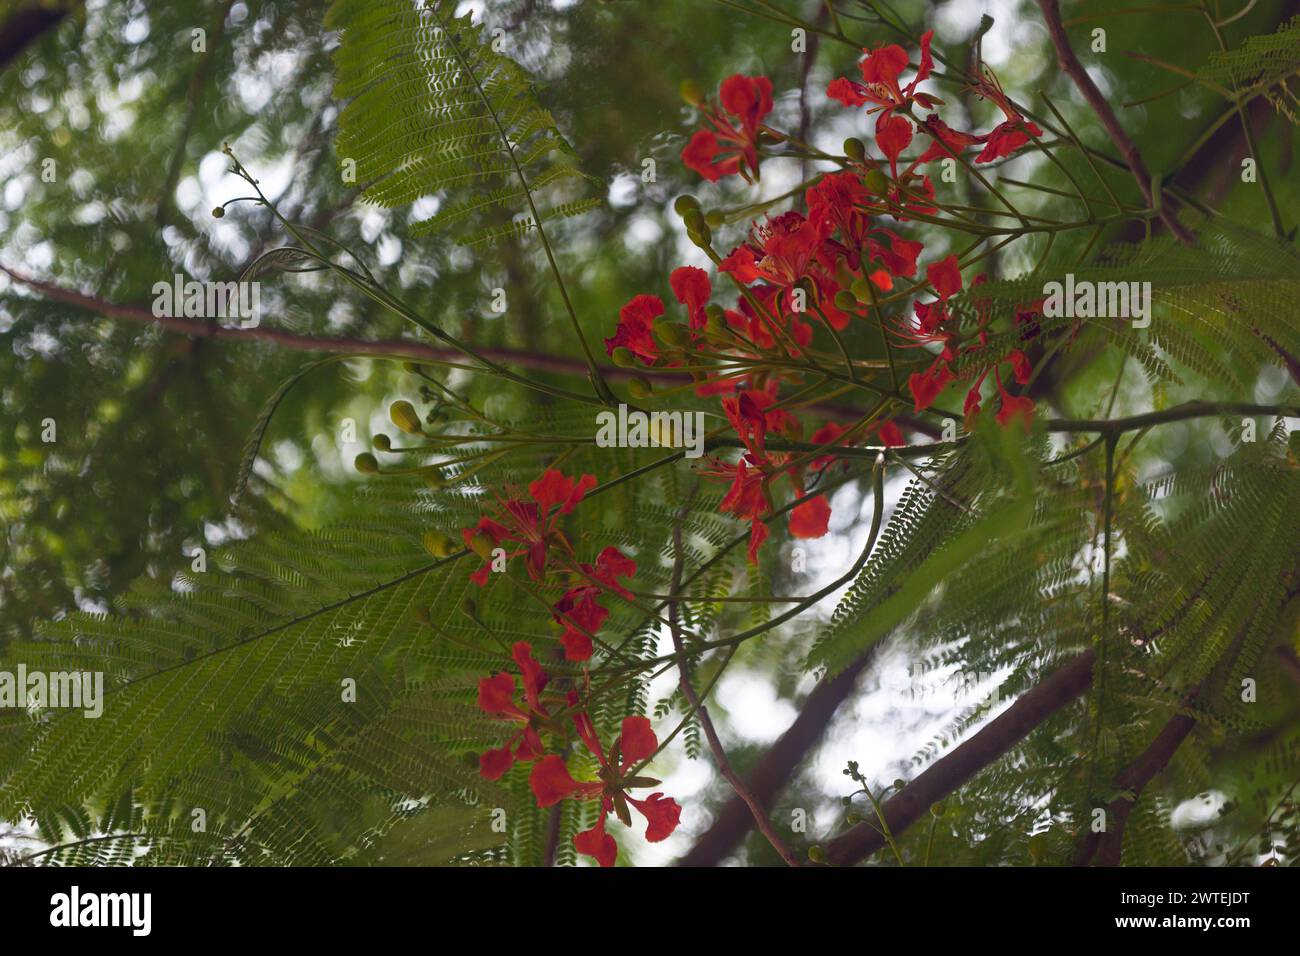 The Delonix regia is a species of flowering plant in the bean family Fabaceae, subfamily Caesalpinioideae. It is noted for its fern-like leaves and fl Stock Photo